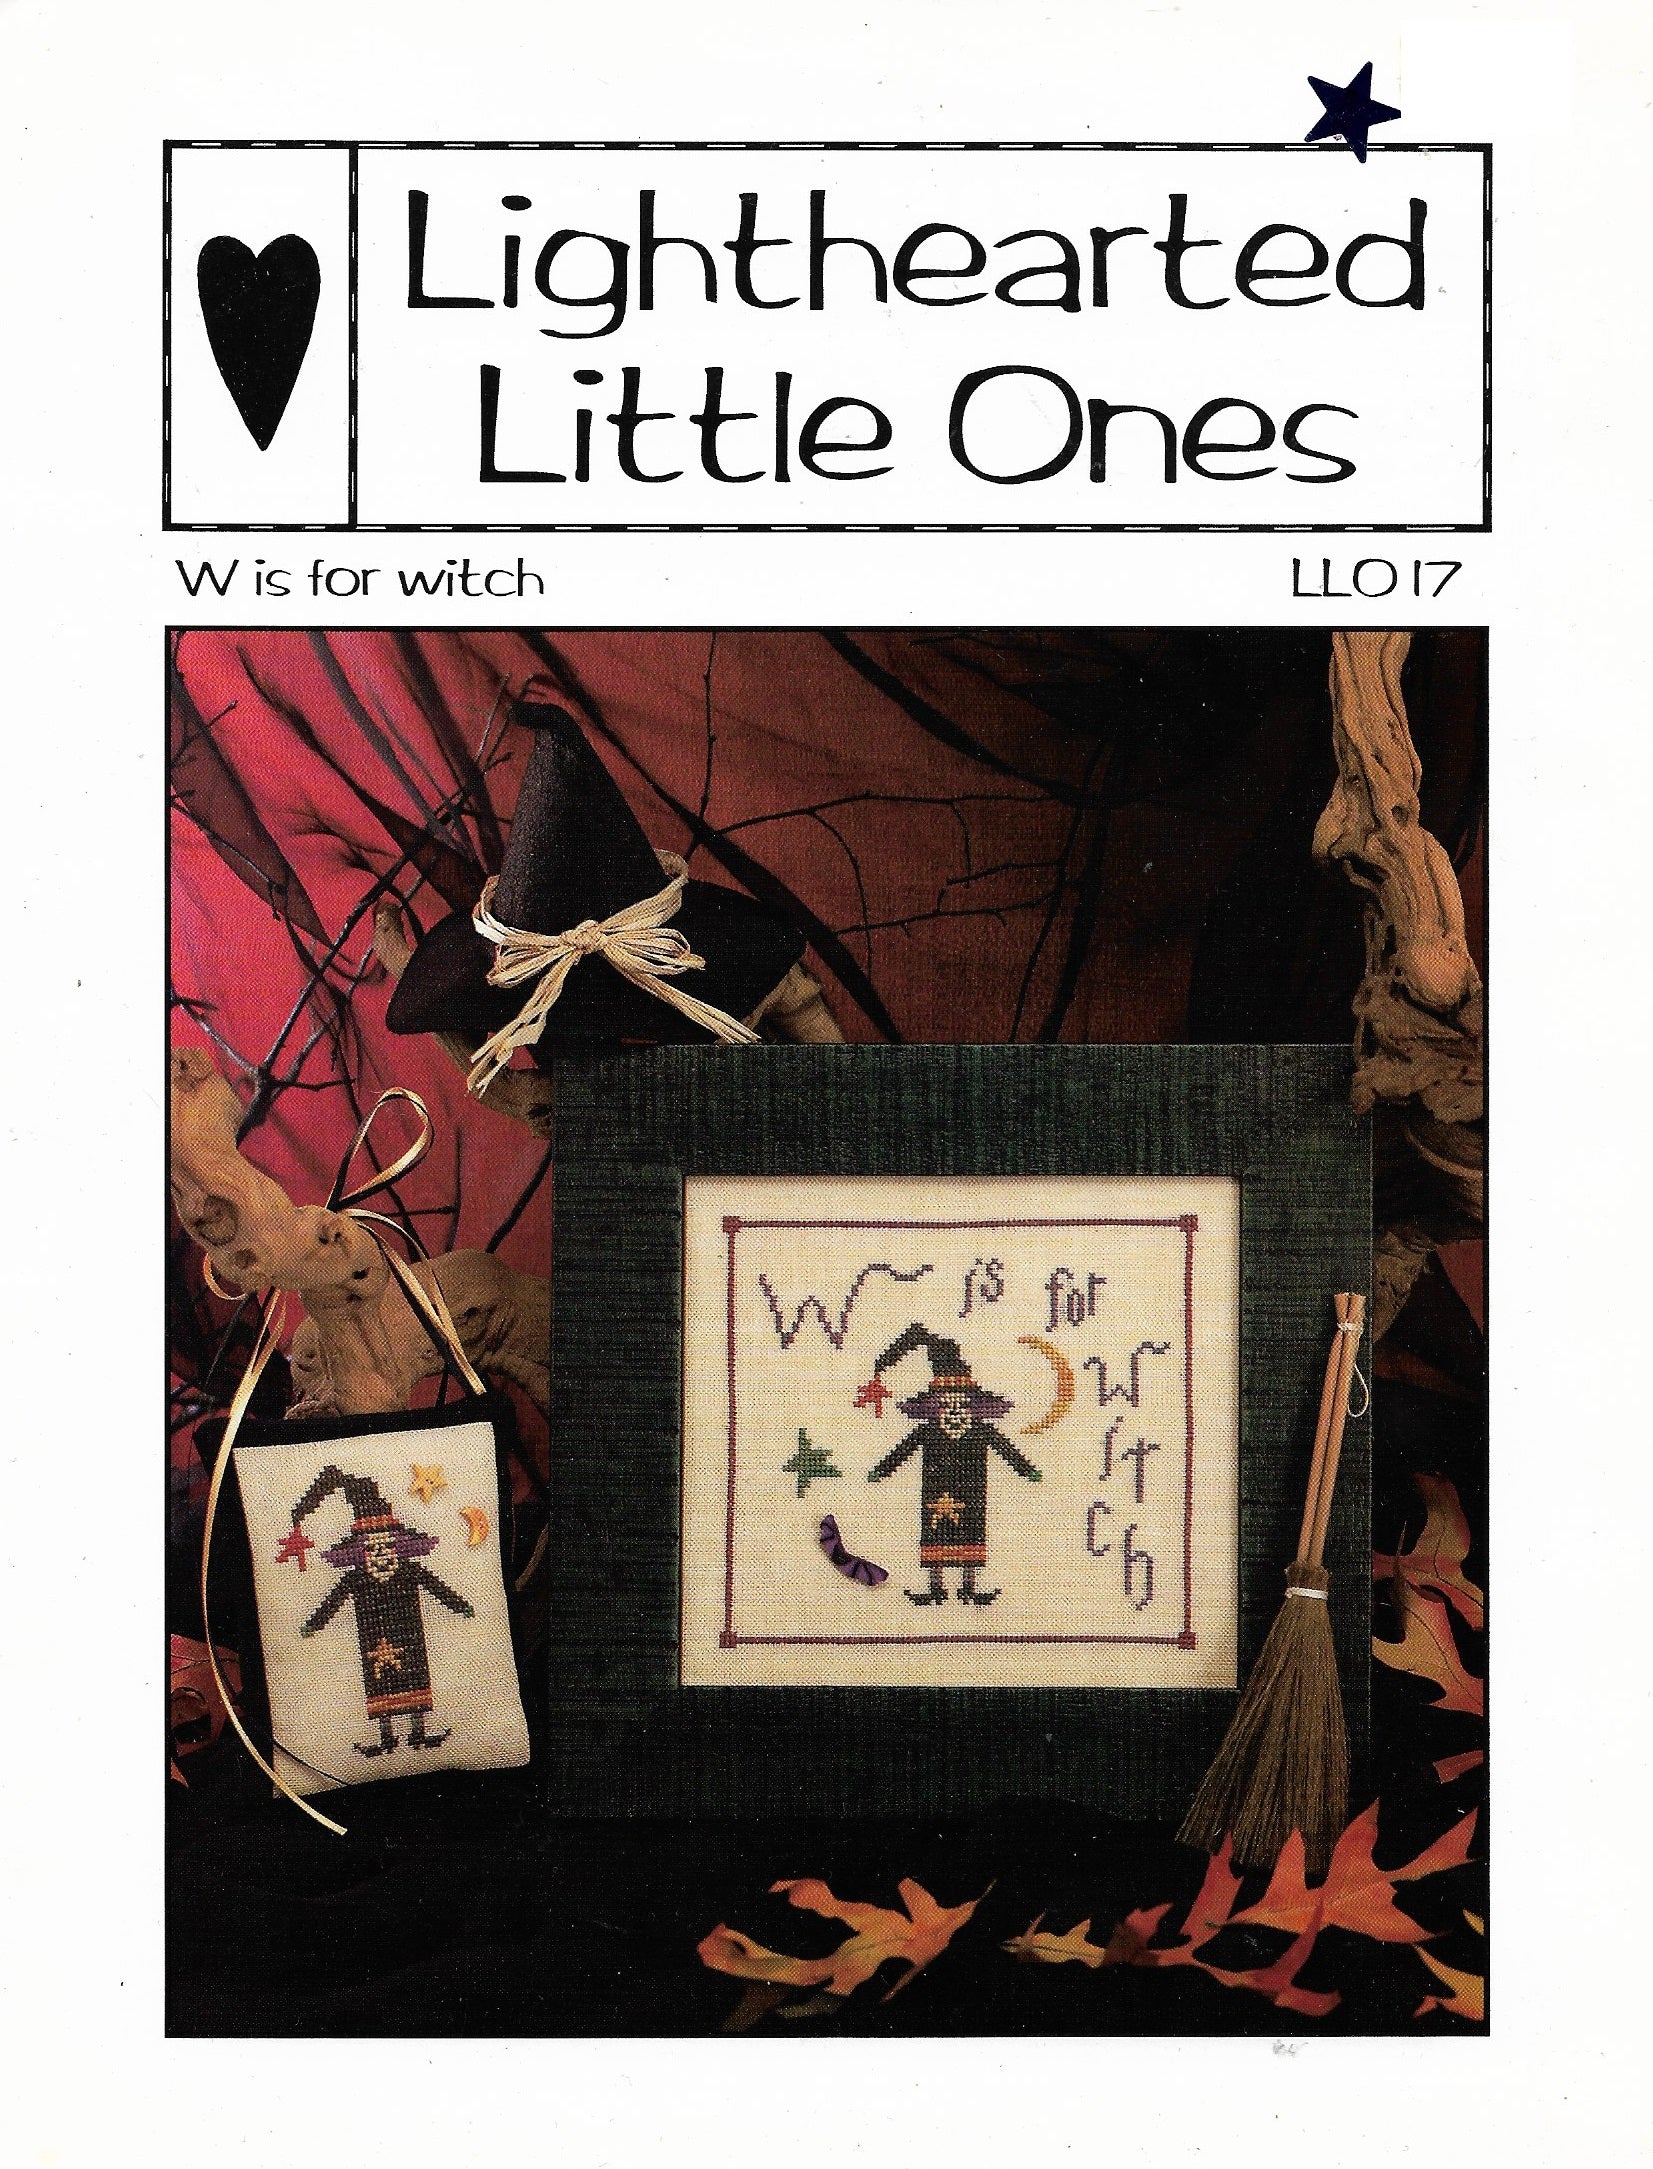 Claire Hatten Designs Light hearted little ones W is for Witch halloween cross stitch pattern